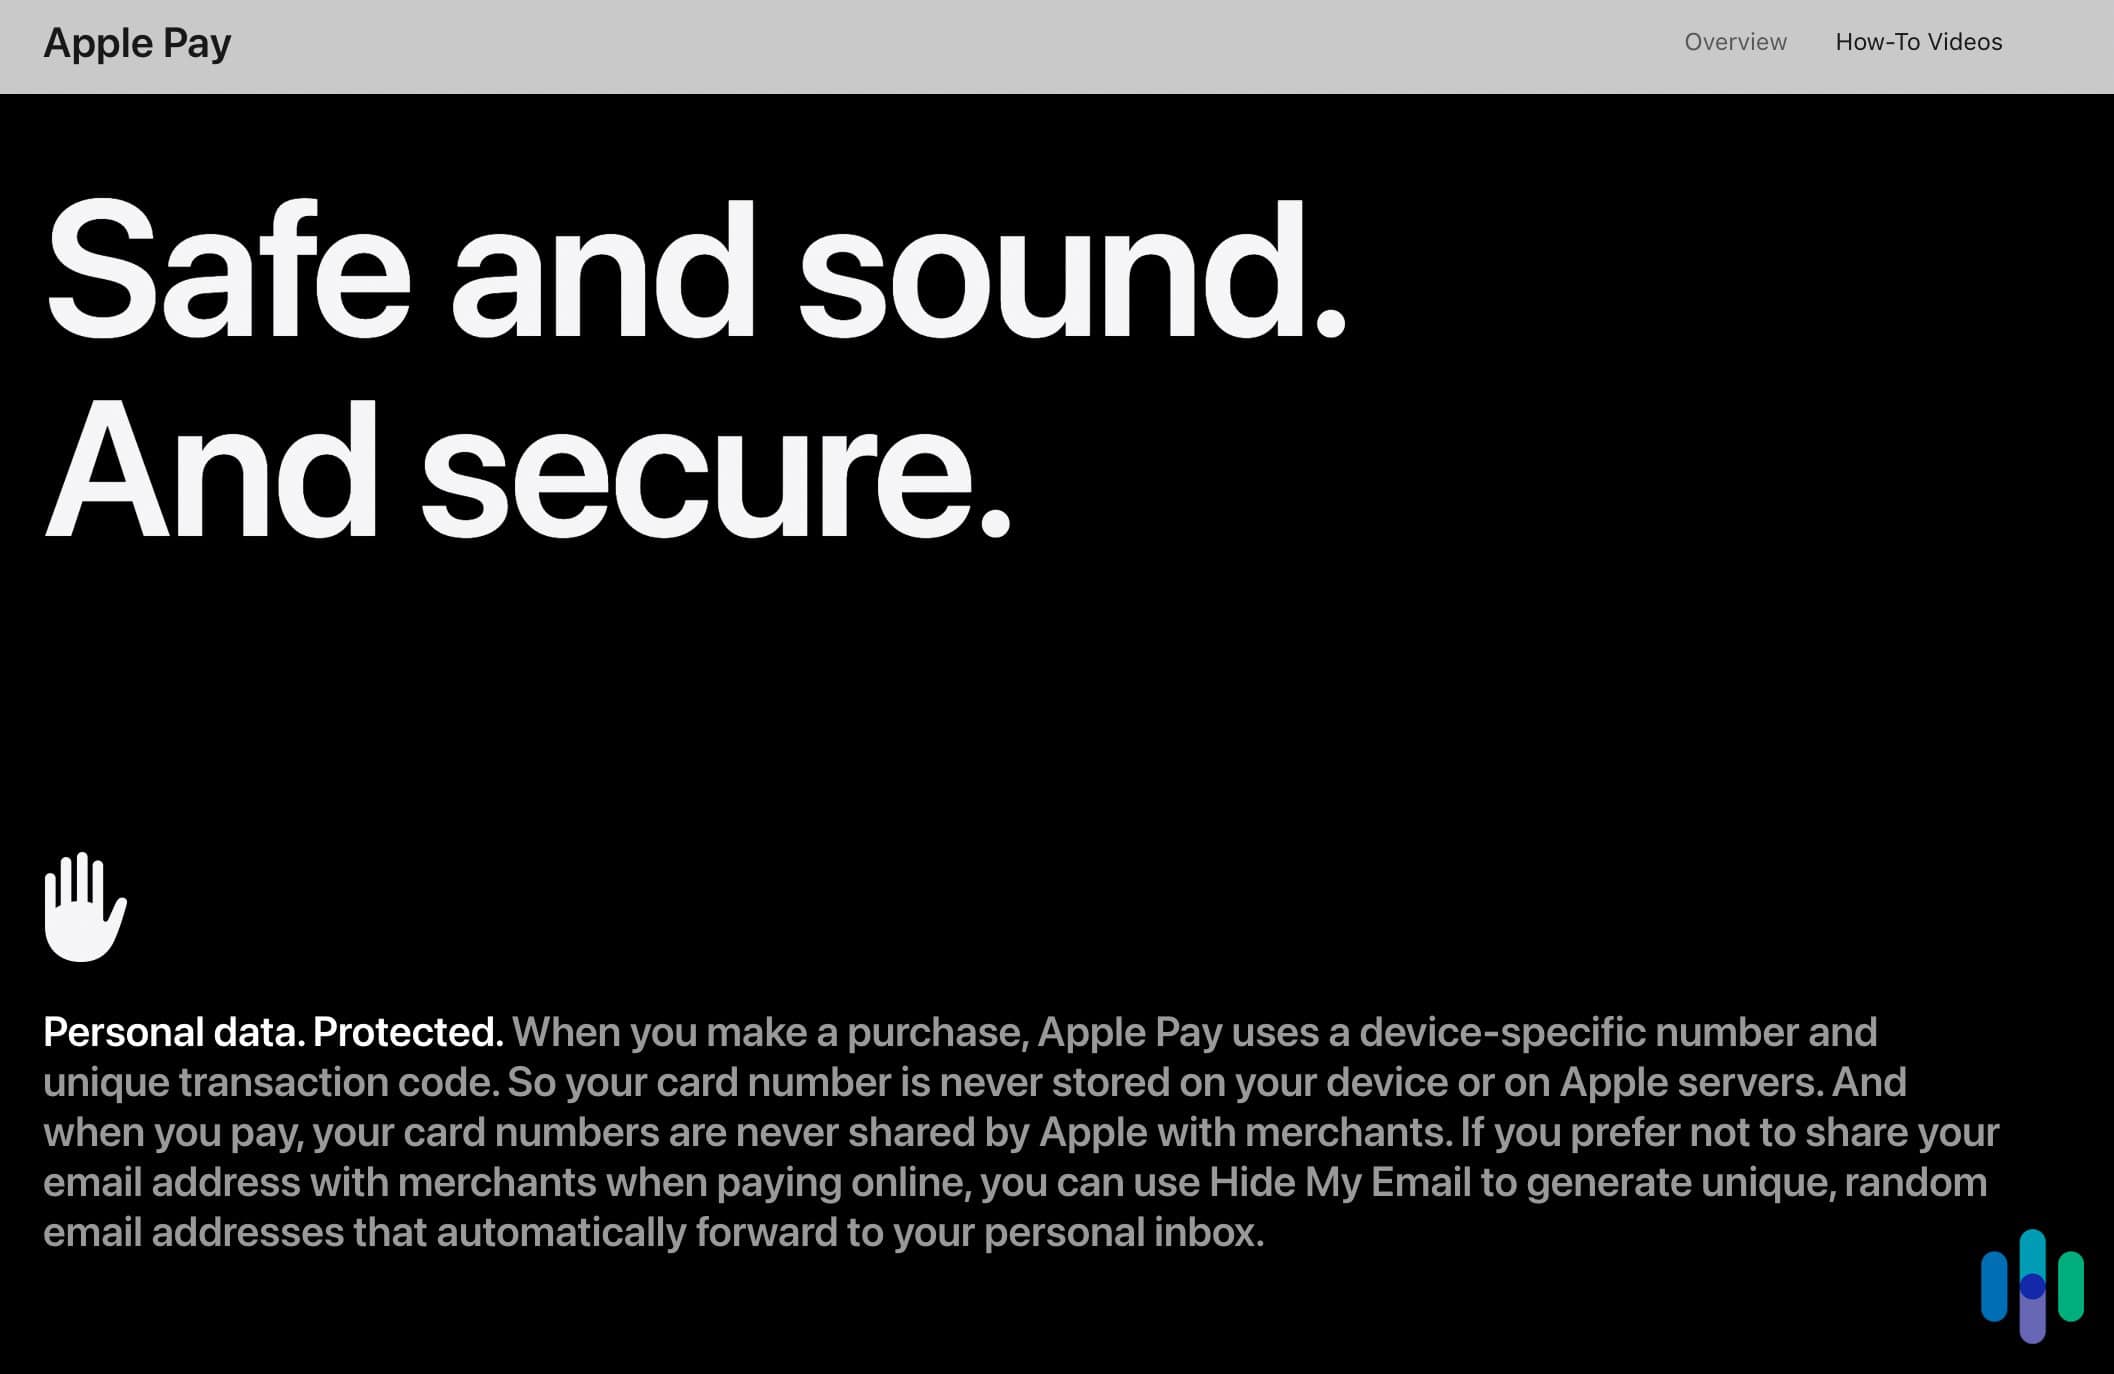 Apple Pay Personal Data Statement